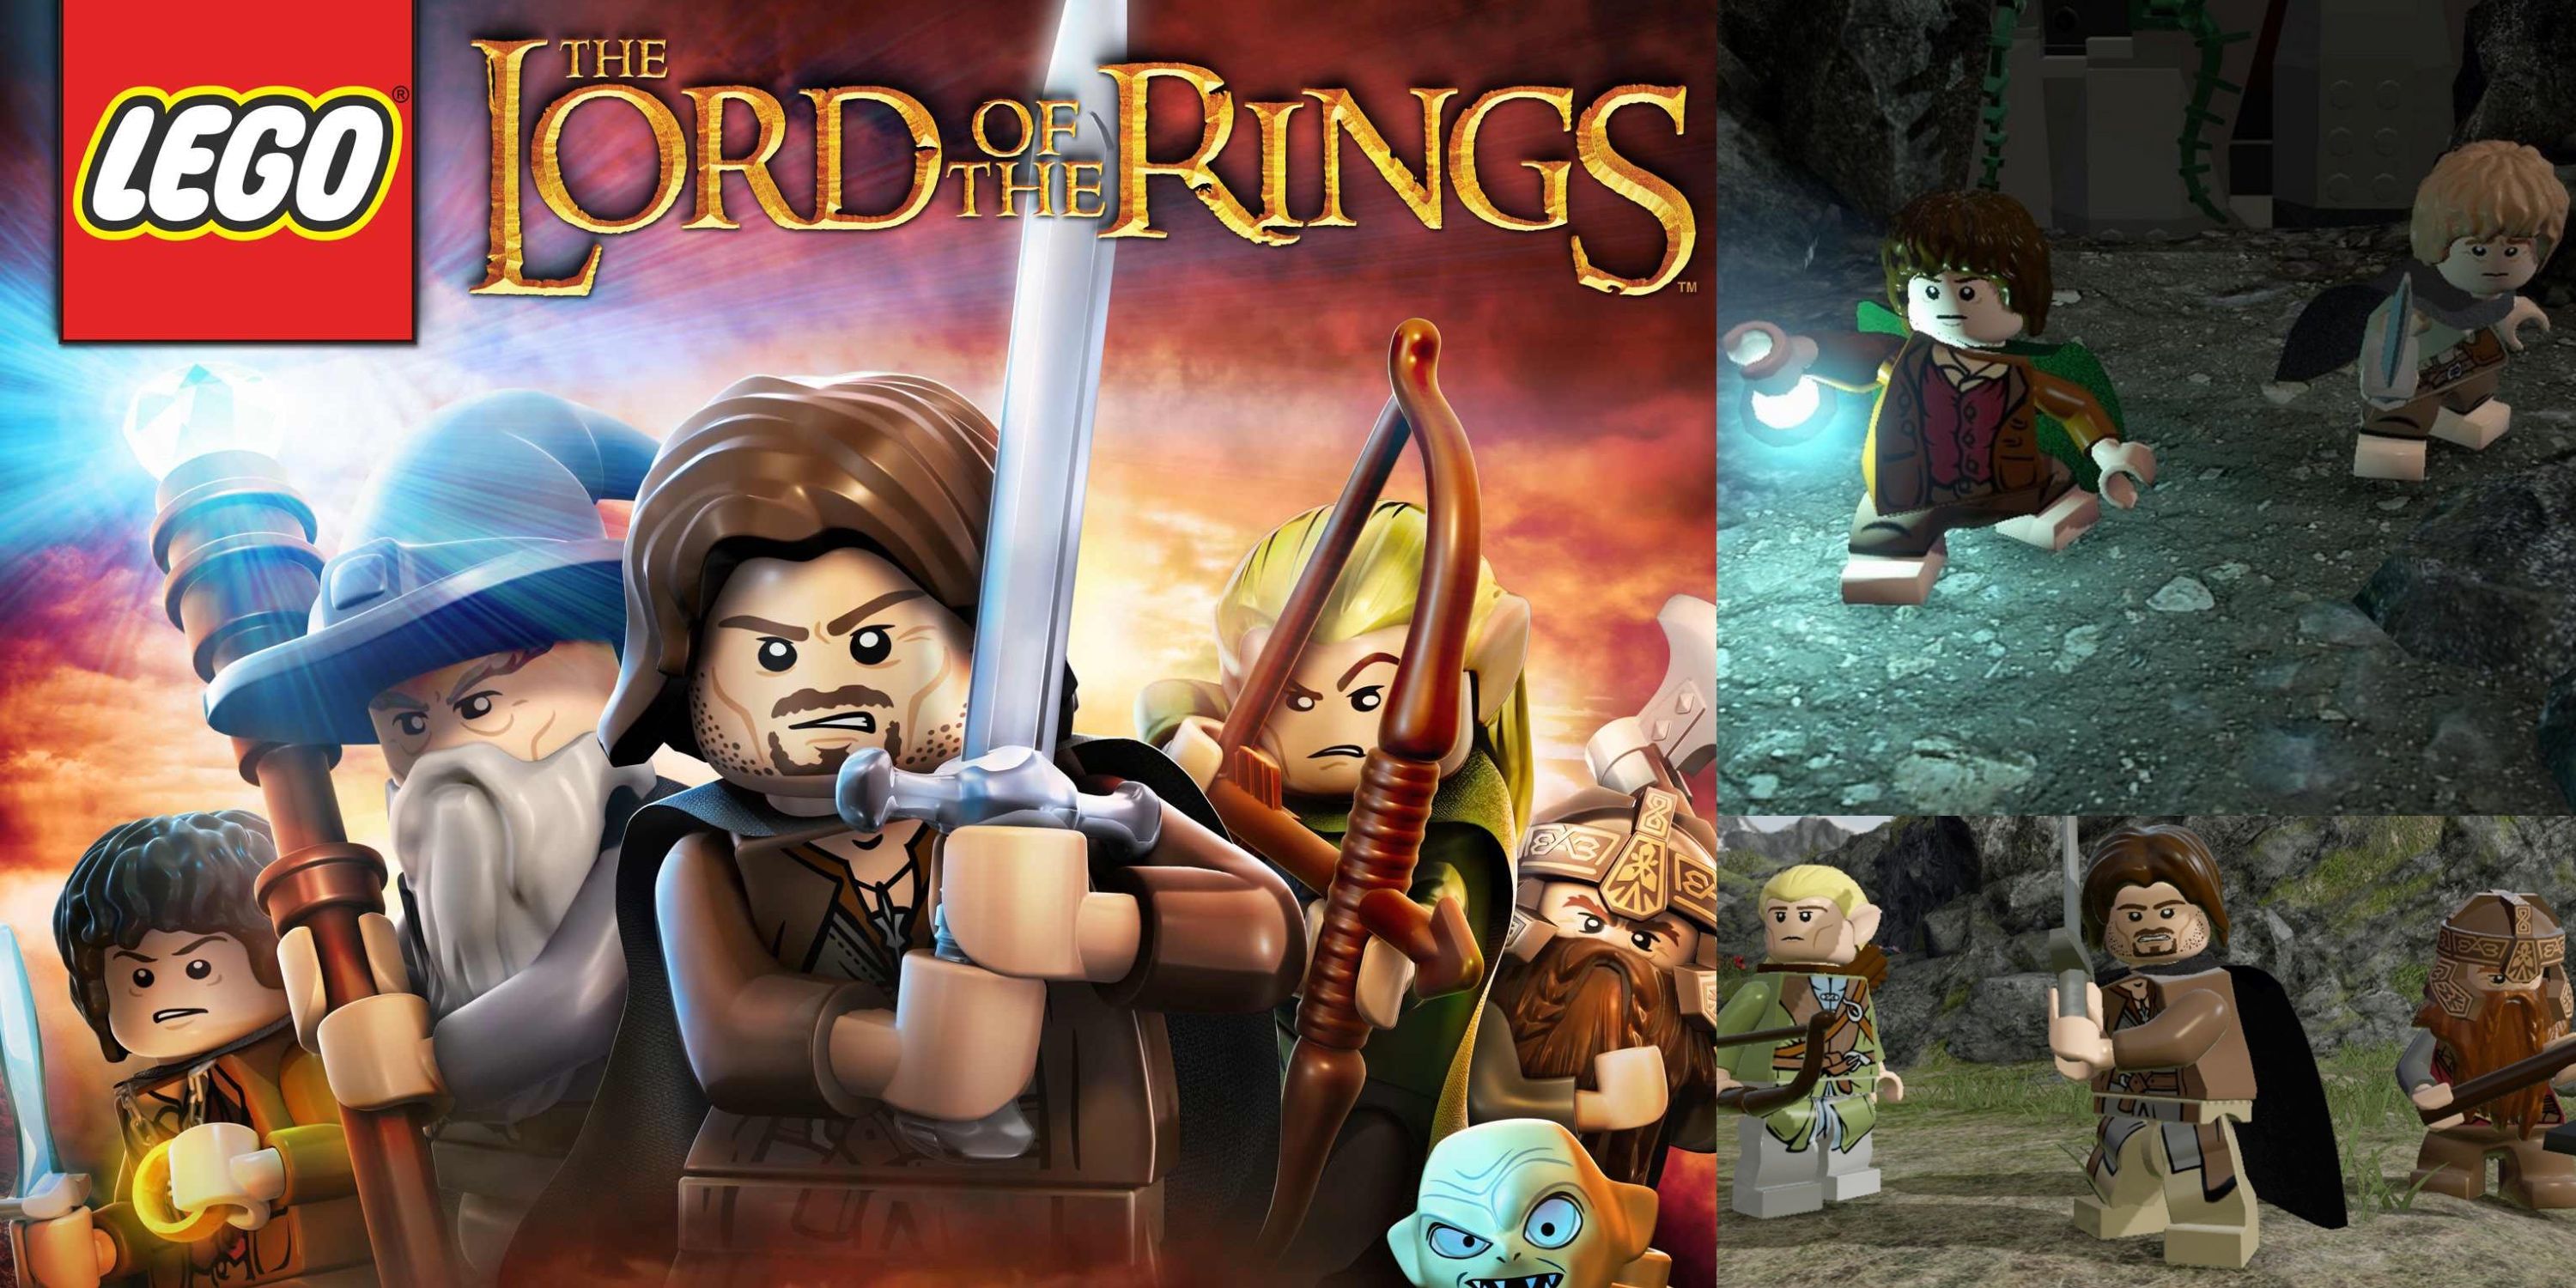 Lego LOTR Cover art, and screenshots of iconic characters